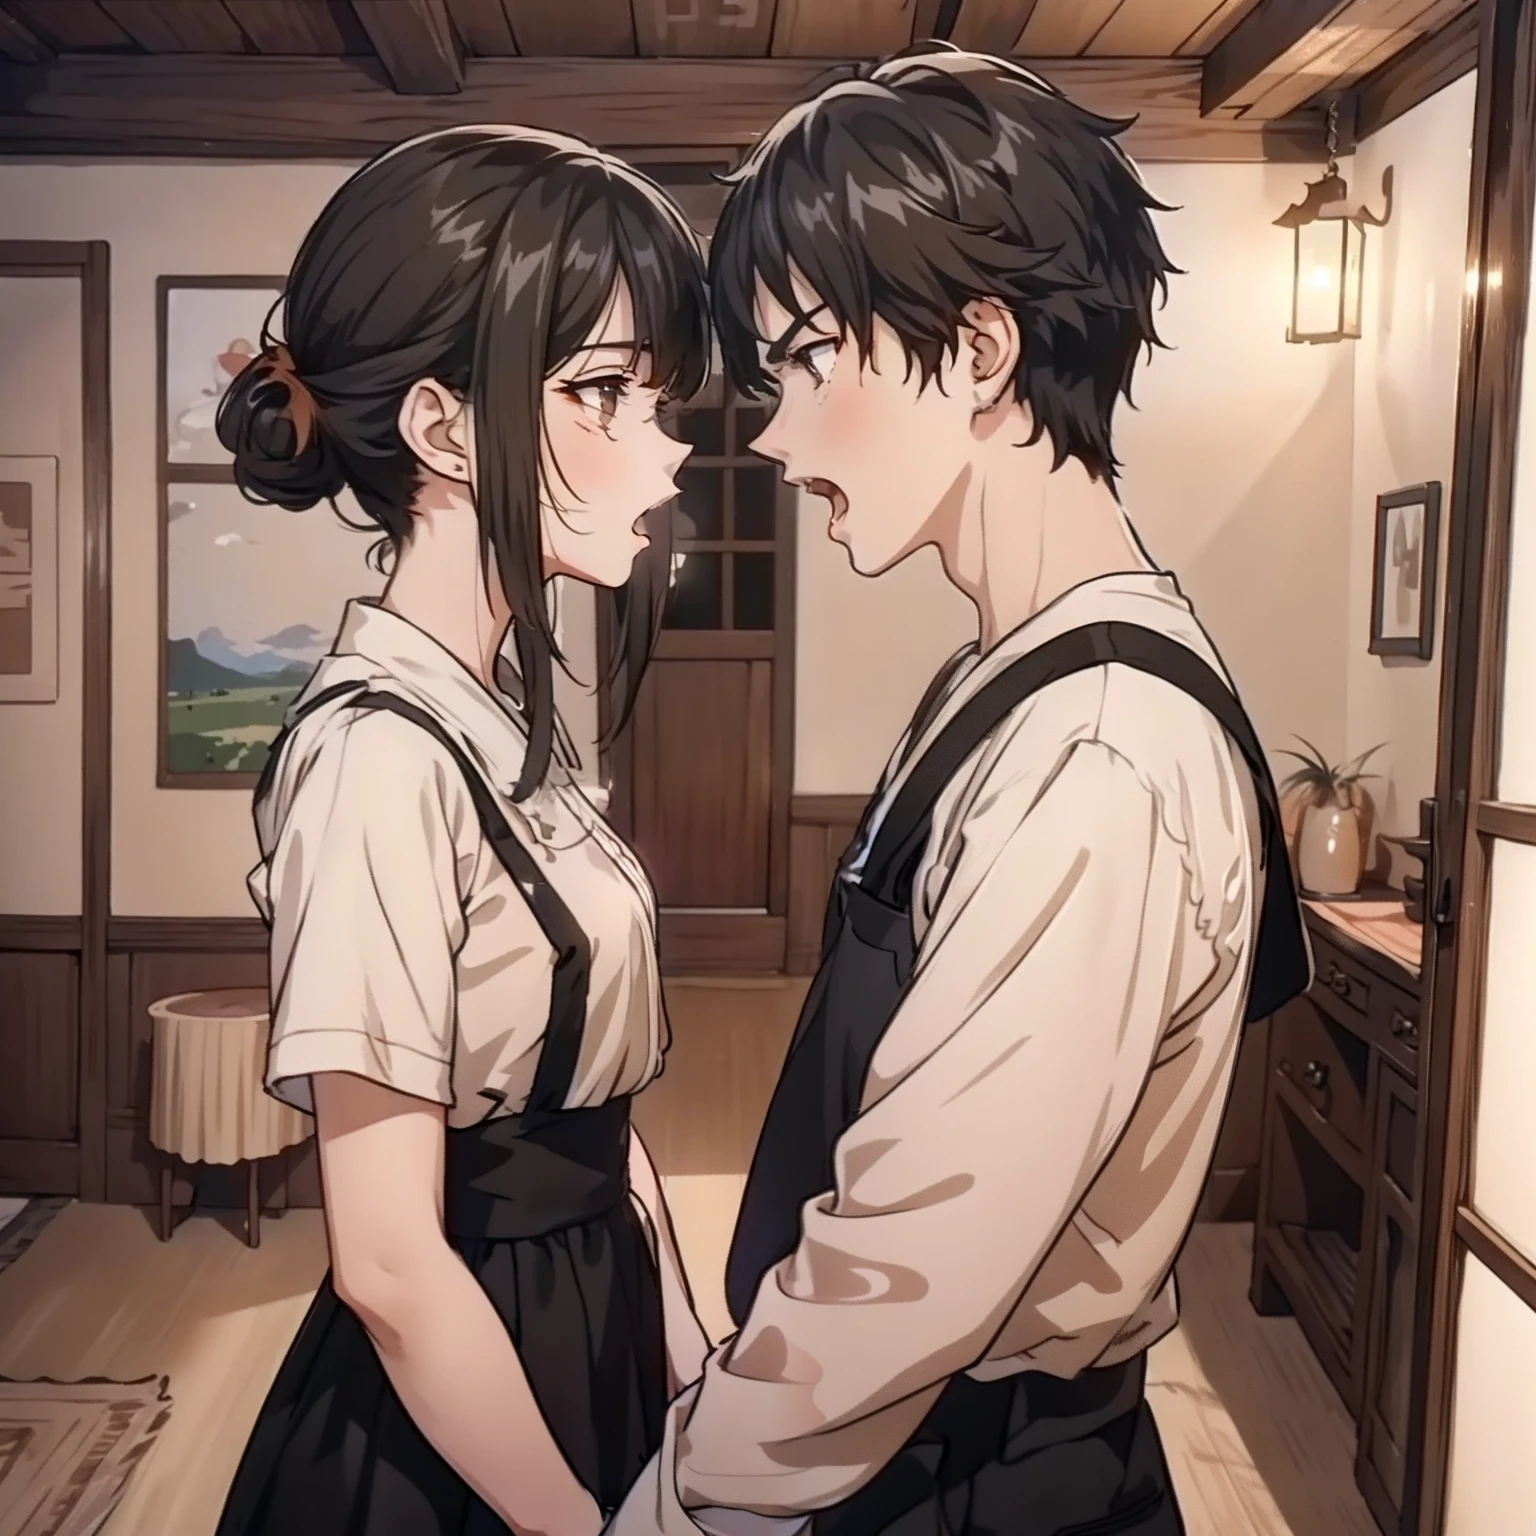 In a village room, a young couple stands side by side in the room talking angrily, (young couple 1.5) (open mouth yelling 1.5) (angry expression 1.5) (background is in the village room) anime style 4 K, anime rendering, anime style. 8K, upper body display 1.5) (cinematic lighting 1.5)